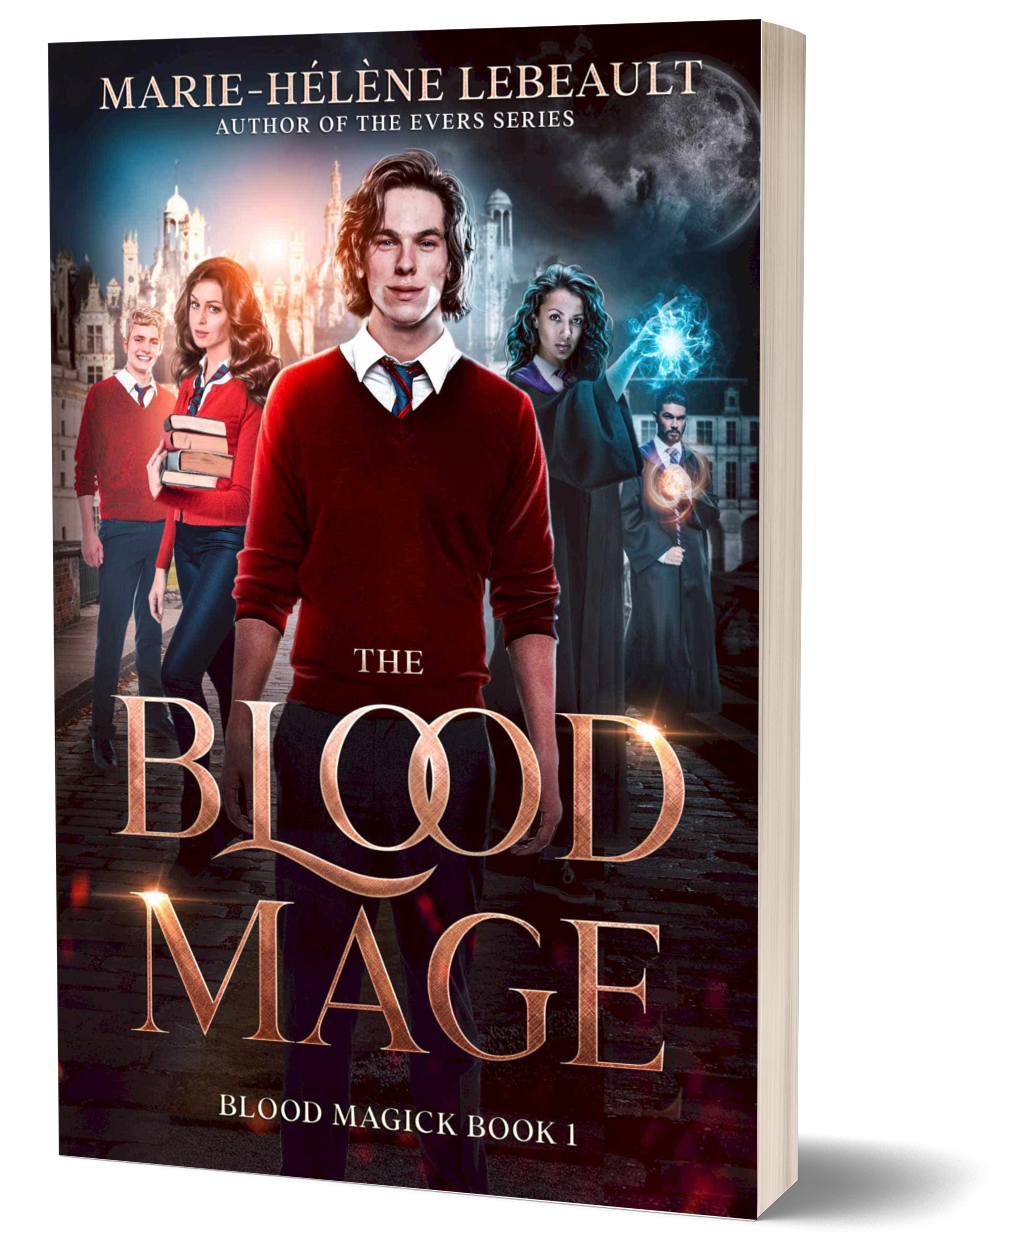 The Blood Mage (Blood Magick Trilogy #1) - Paperback